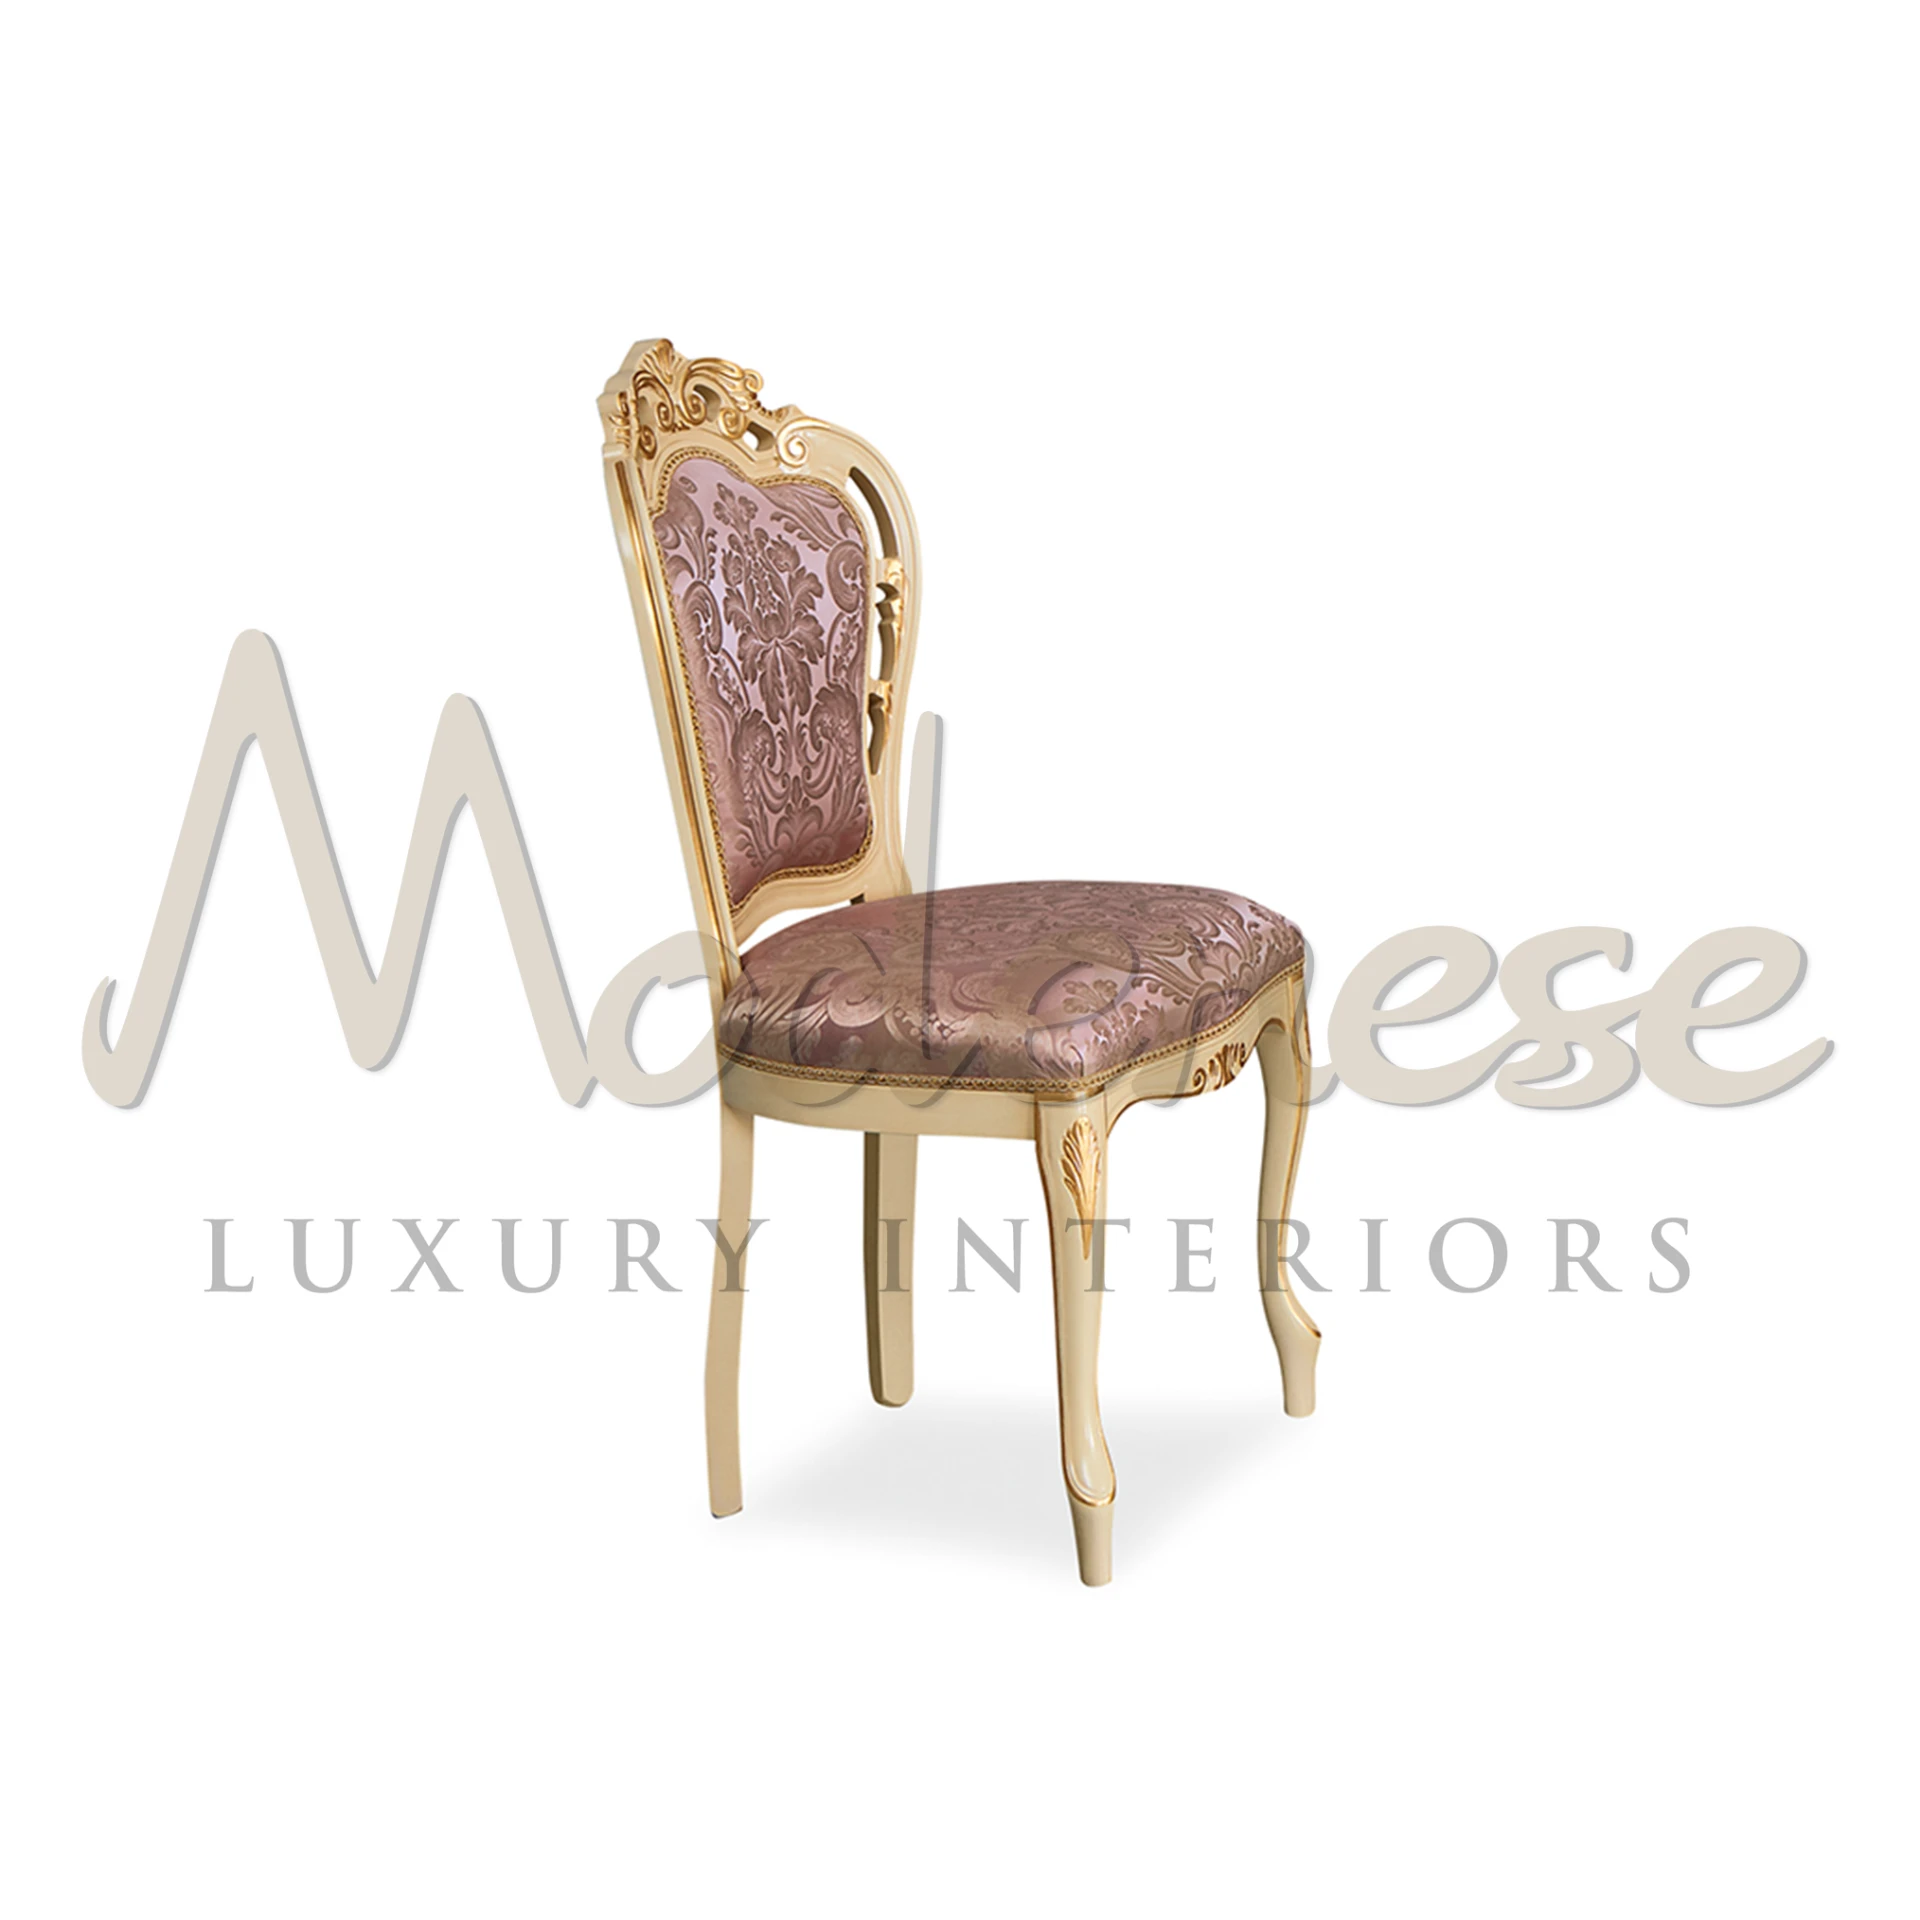 Stylish pink fabric chair with intricate design and golden details.